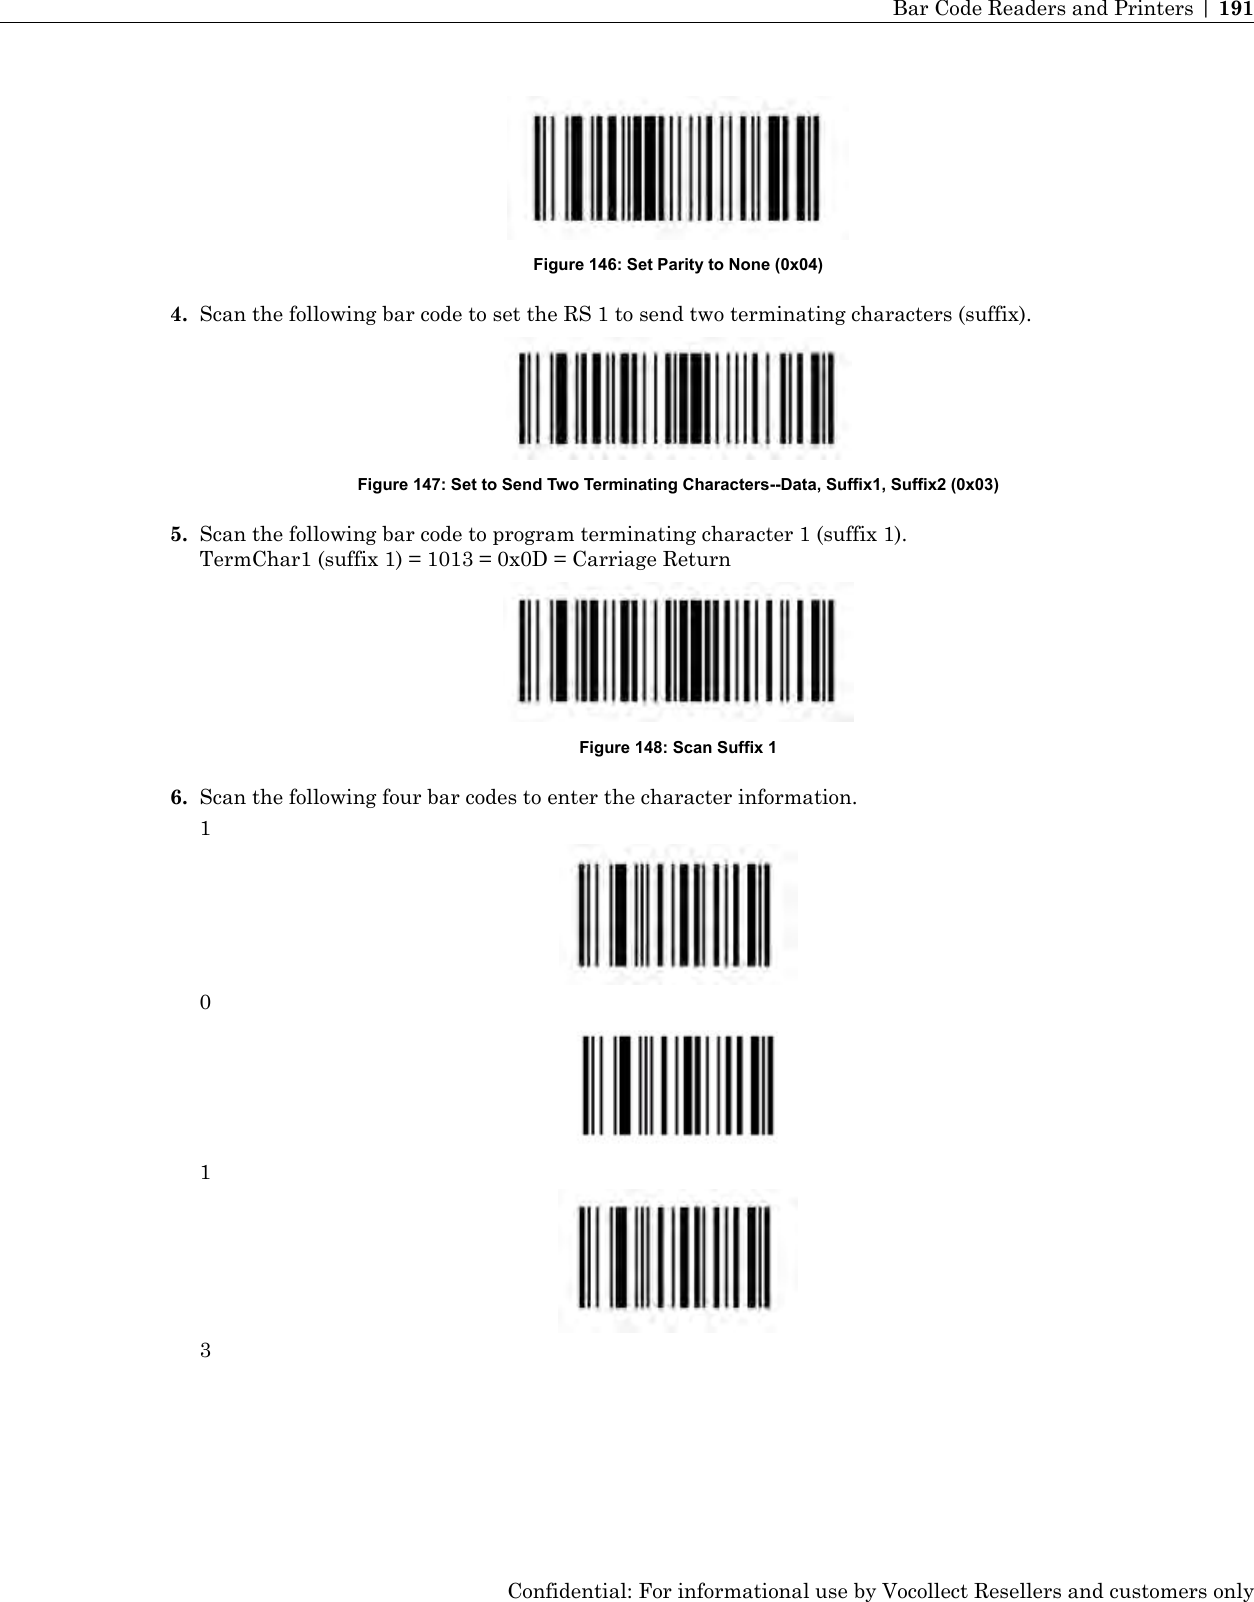 Figure 146: Set Parity to None (0x04)4. Scan the following bar code to set the RS 1 to send two terminating characters (suffix).Figure 147: Set to Send Two Terminating Characters--Data, Suffix1, Suffix2 (0x03)5. Scan the following bar code to program terminating character 1 (suffix 1).TermChar1 (suffix 1) = 1013 = 0x0D = Carriage ReturnFigure 148: Scan Suffix 16. Scan the following four bar codes to enter the character information.1013Confidential: For informational use by Vocollect Resellers and customers onlyBar Code Readers and Printers | 191